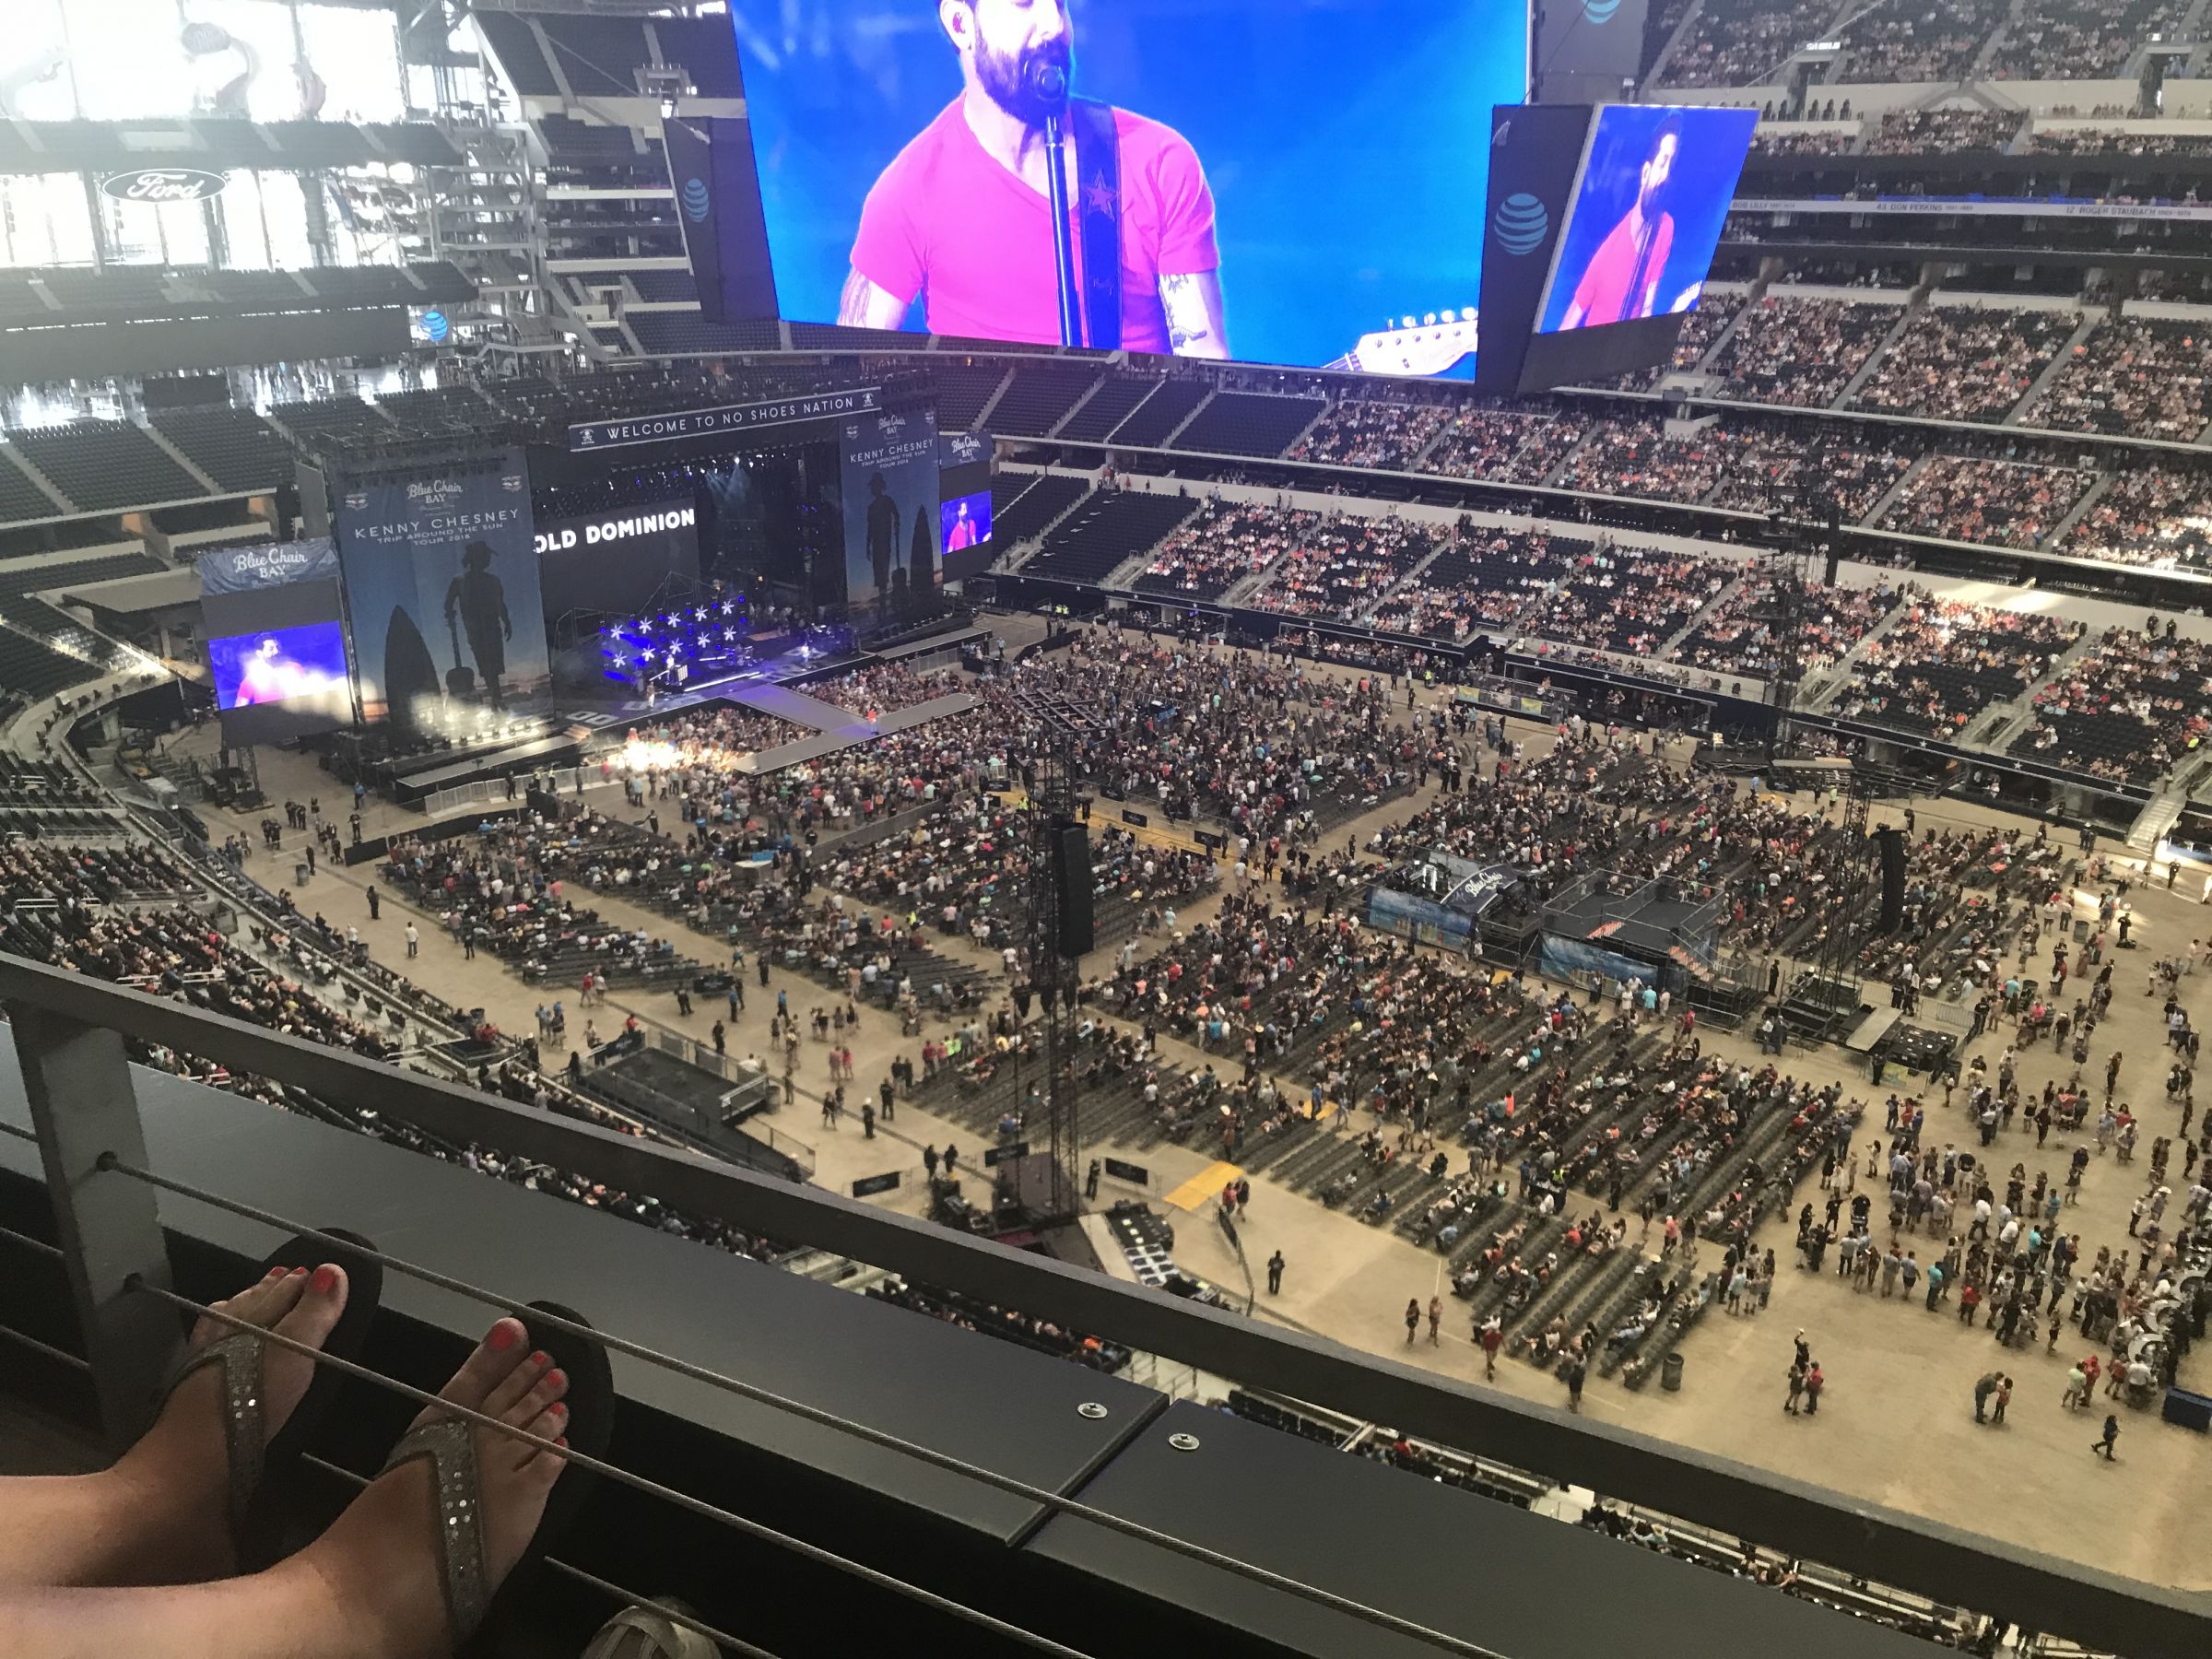 Section 438 at AT&T Stadium for Concerts